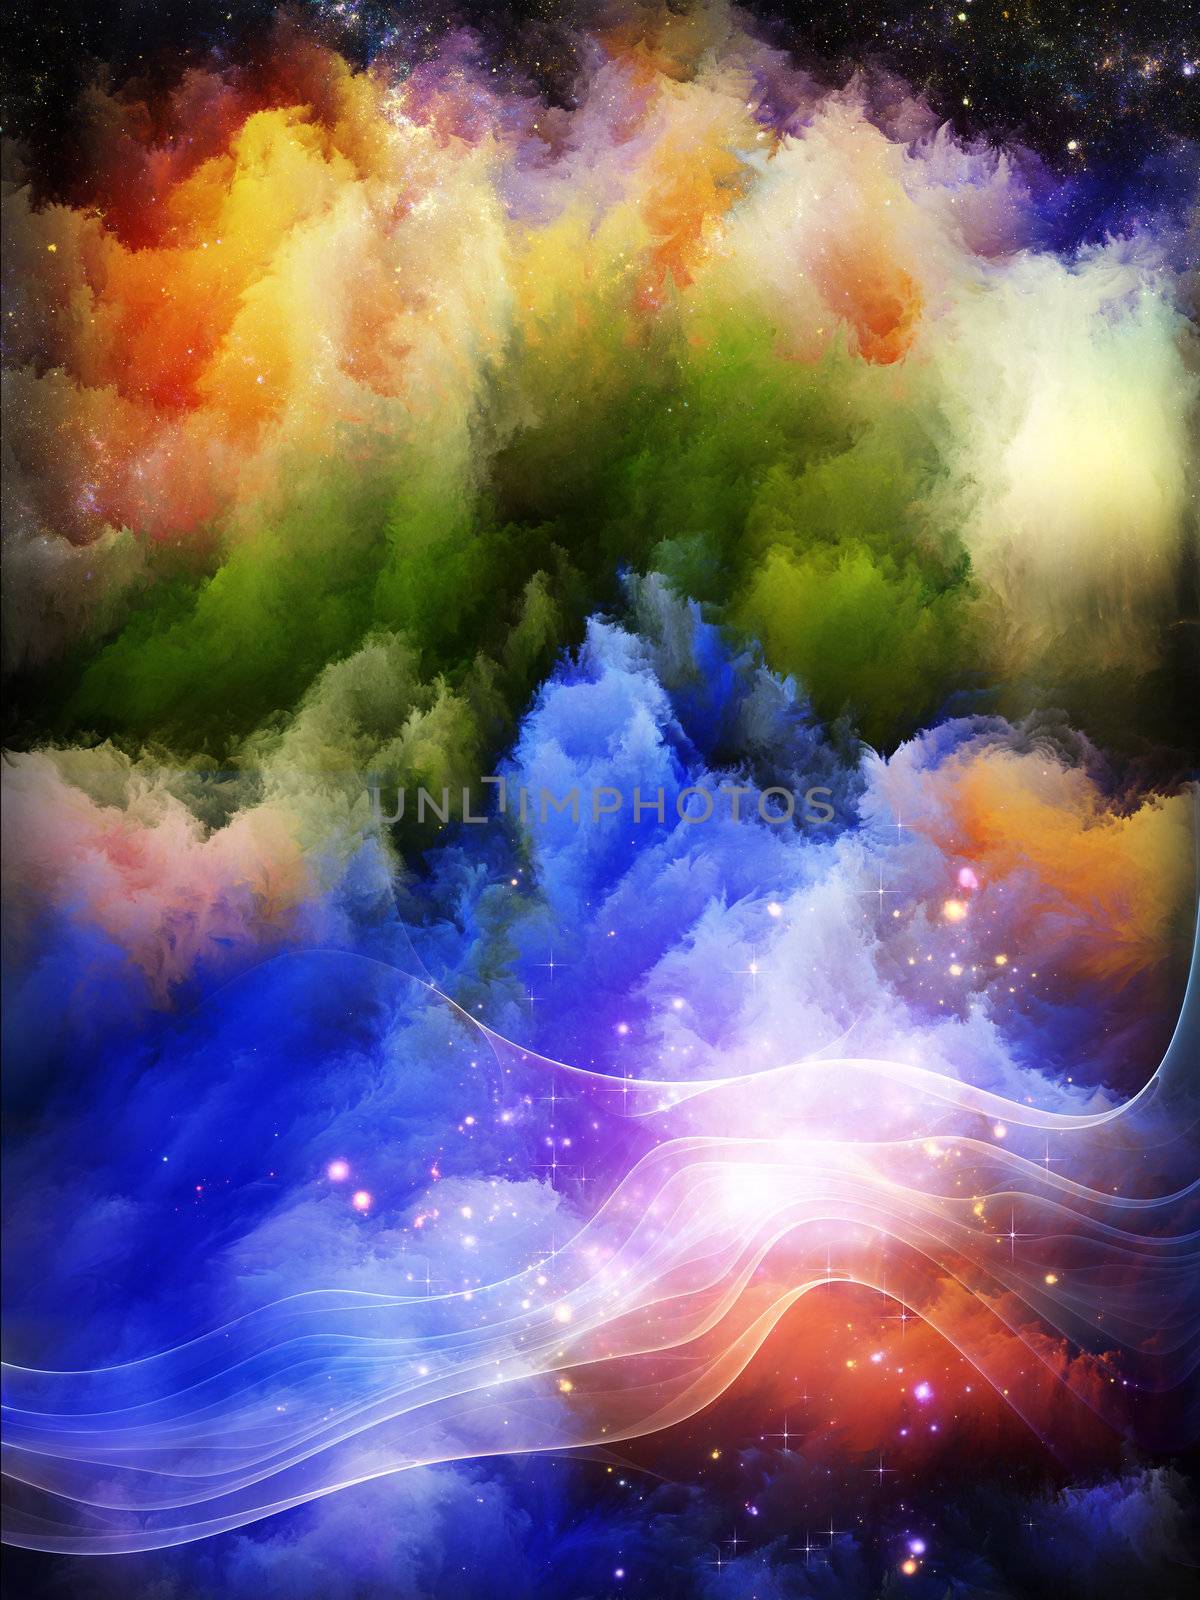 Never Worlds series. Composition of colorful dimensional fractal worlds on the subject of fantasy, dreams, creativity,  imagination and art